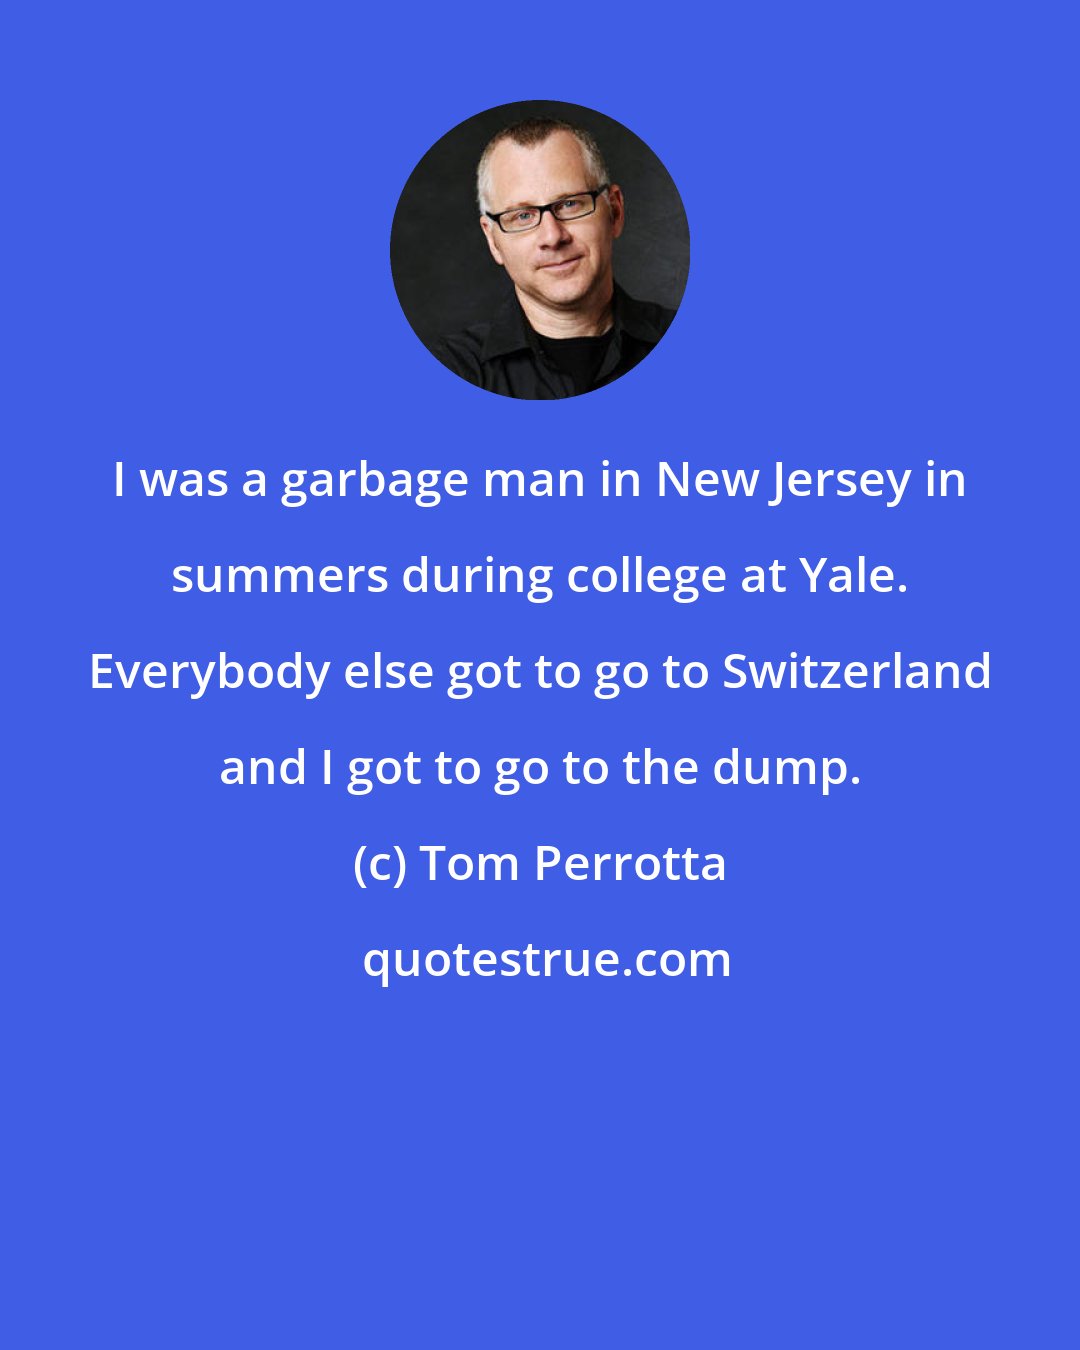 Tom Perrotta: I was a garbage man in New Jersey in summers during college at Yale. Everybody else got to go to Switzerland and I got to go to the dump.